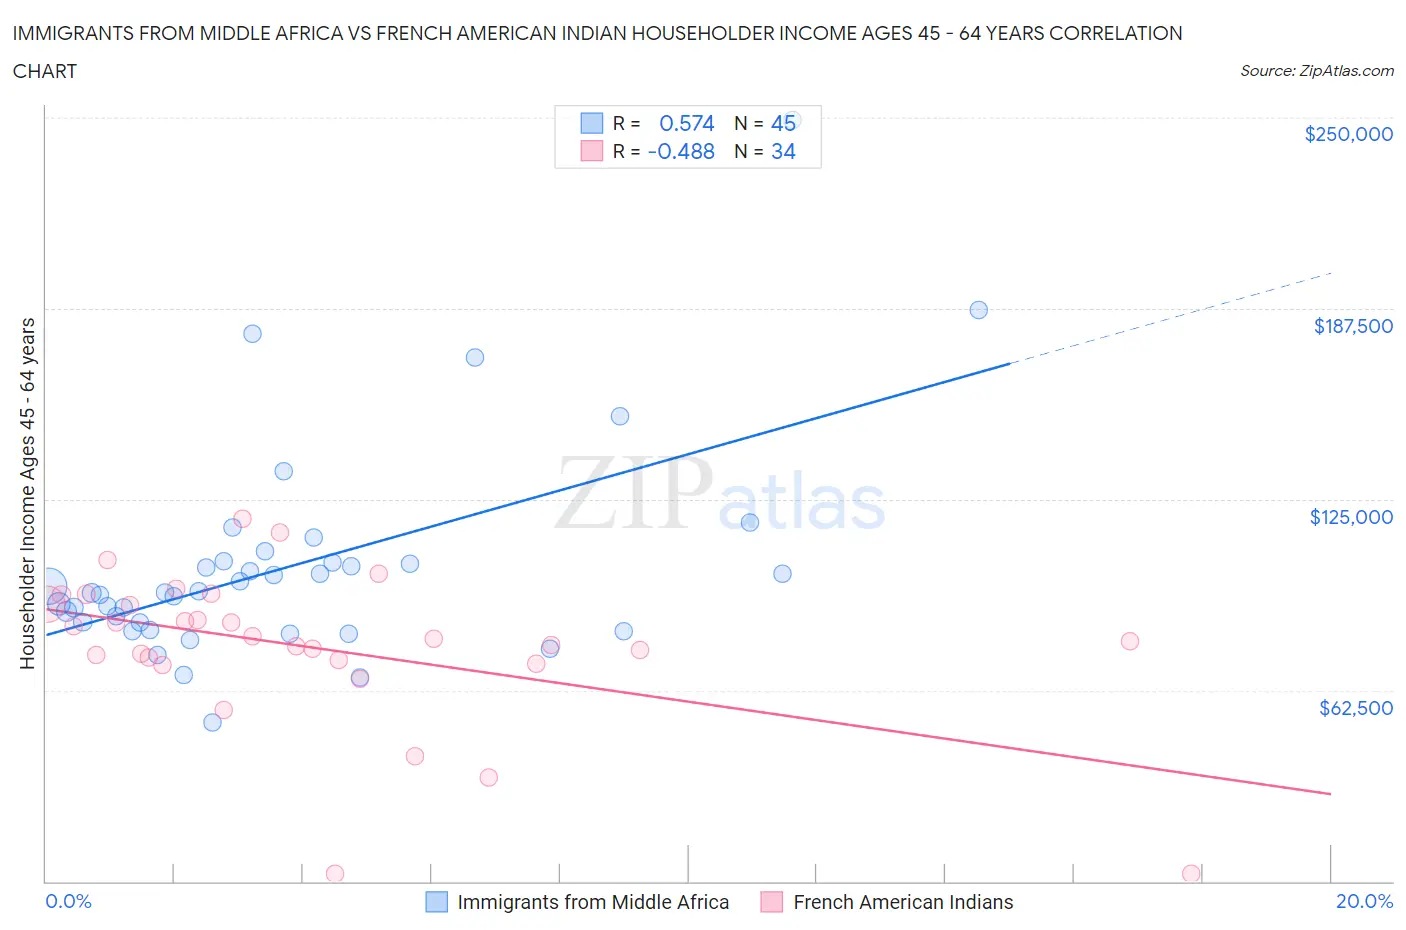 Immigrants from Middle Africa vs French American Indian Householder Income Ages 45 - 64 years